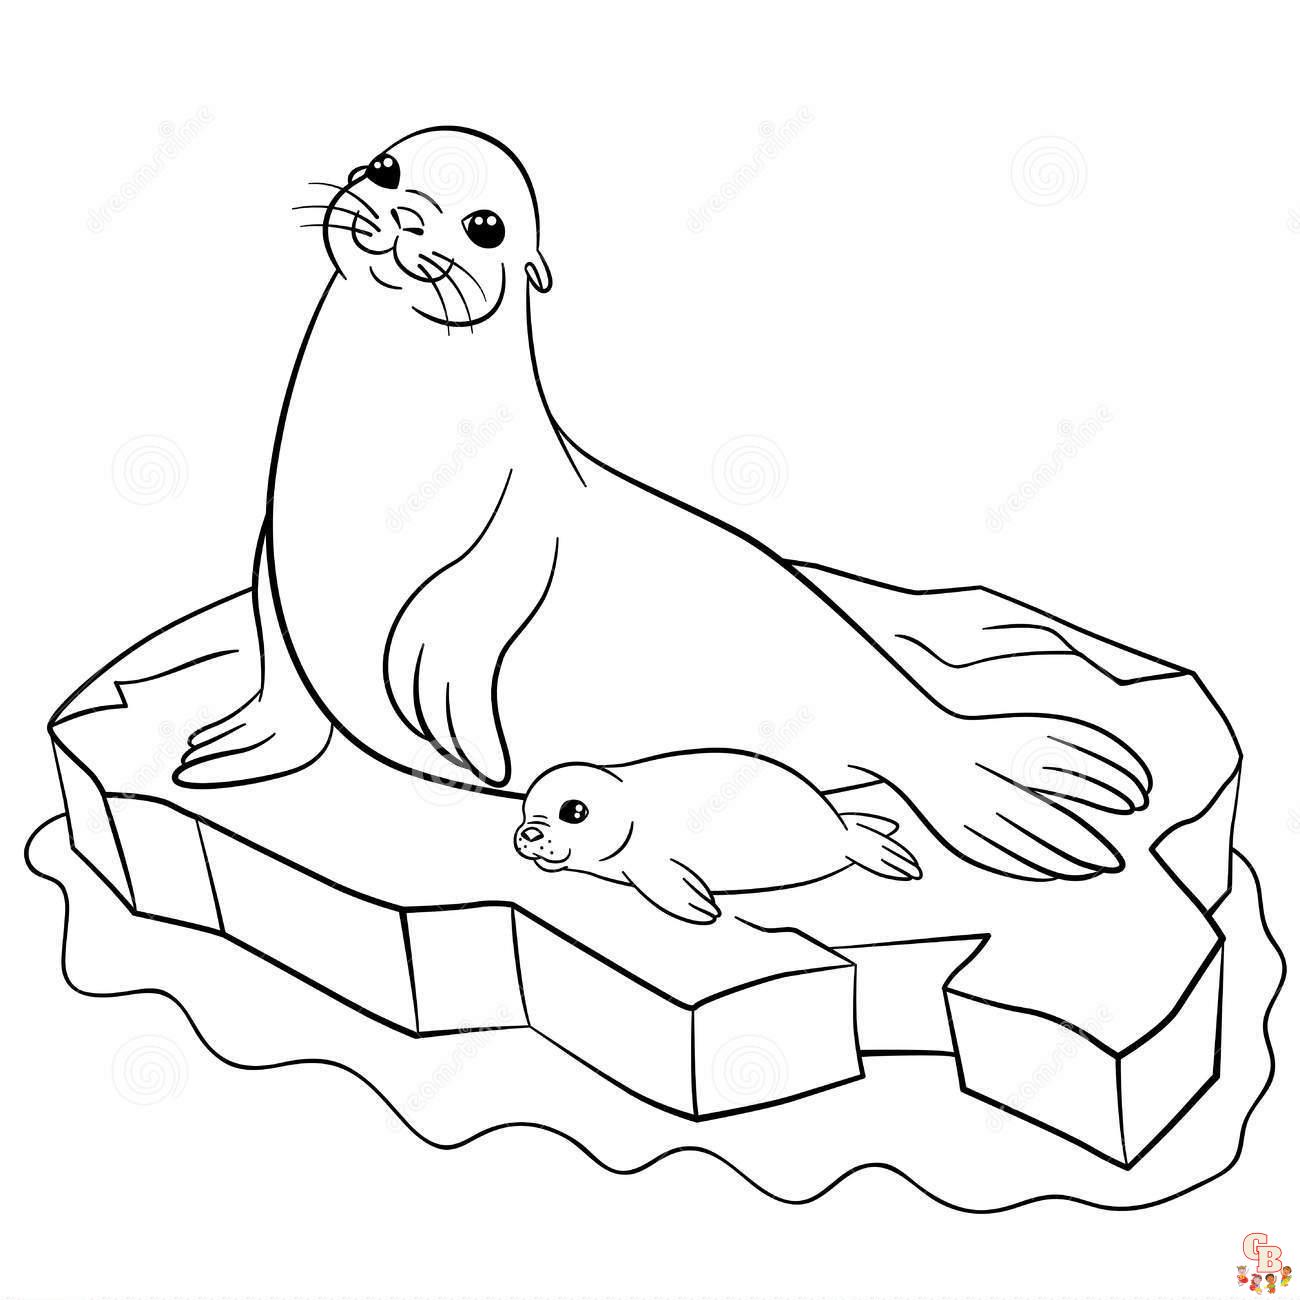 Seal Coloring Pages free